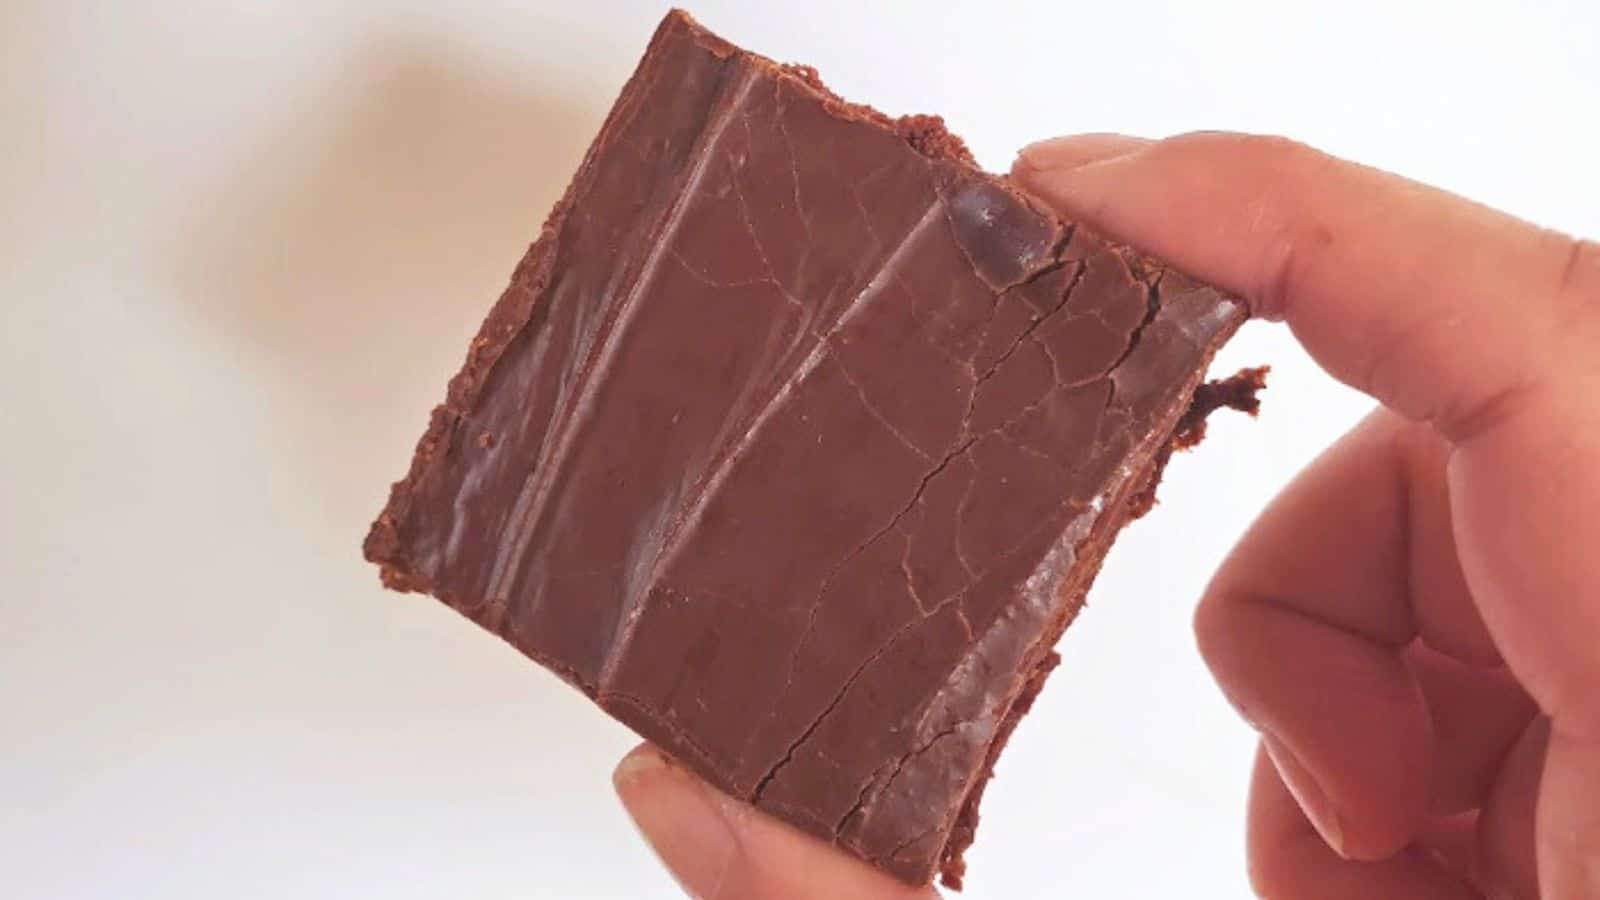 Image shows A hand holding a chocolate covered square brownie with a cracked surface against a light background.